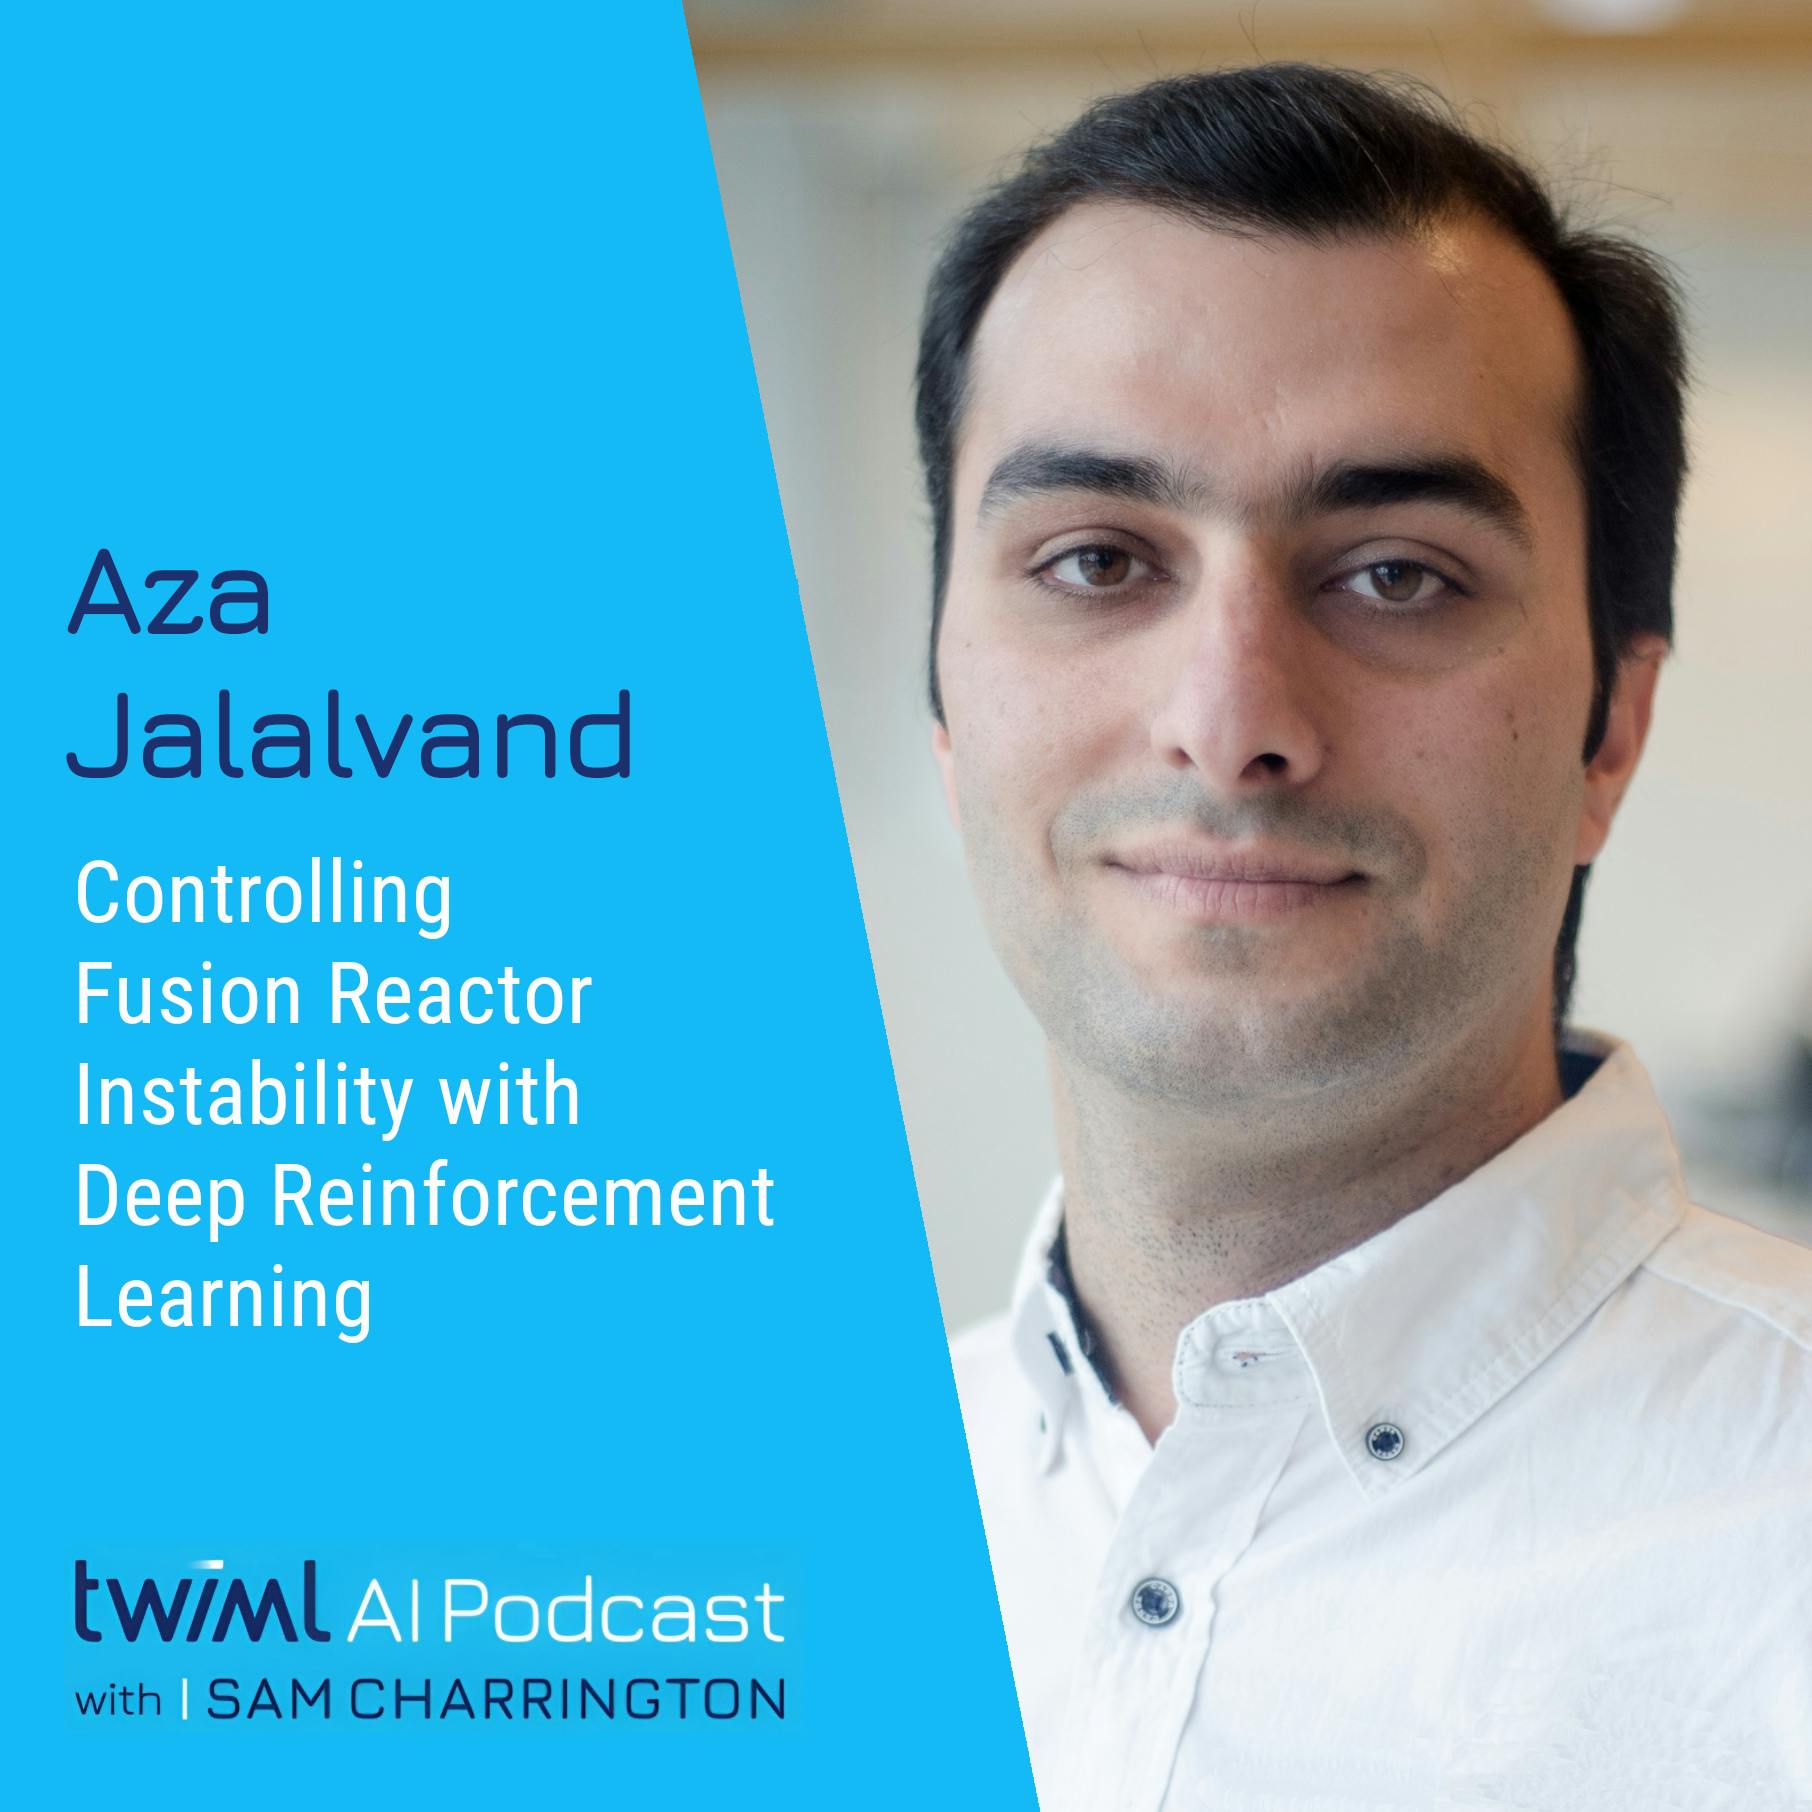 Controlling Fusion Reactor Instability with Deep Reinforcement Learning with Aza Jalalvand - #682